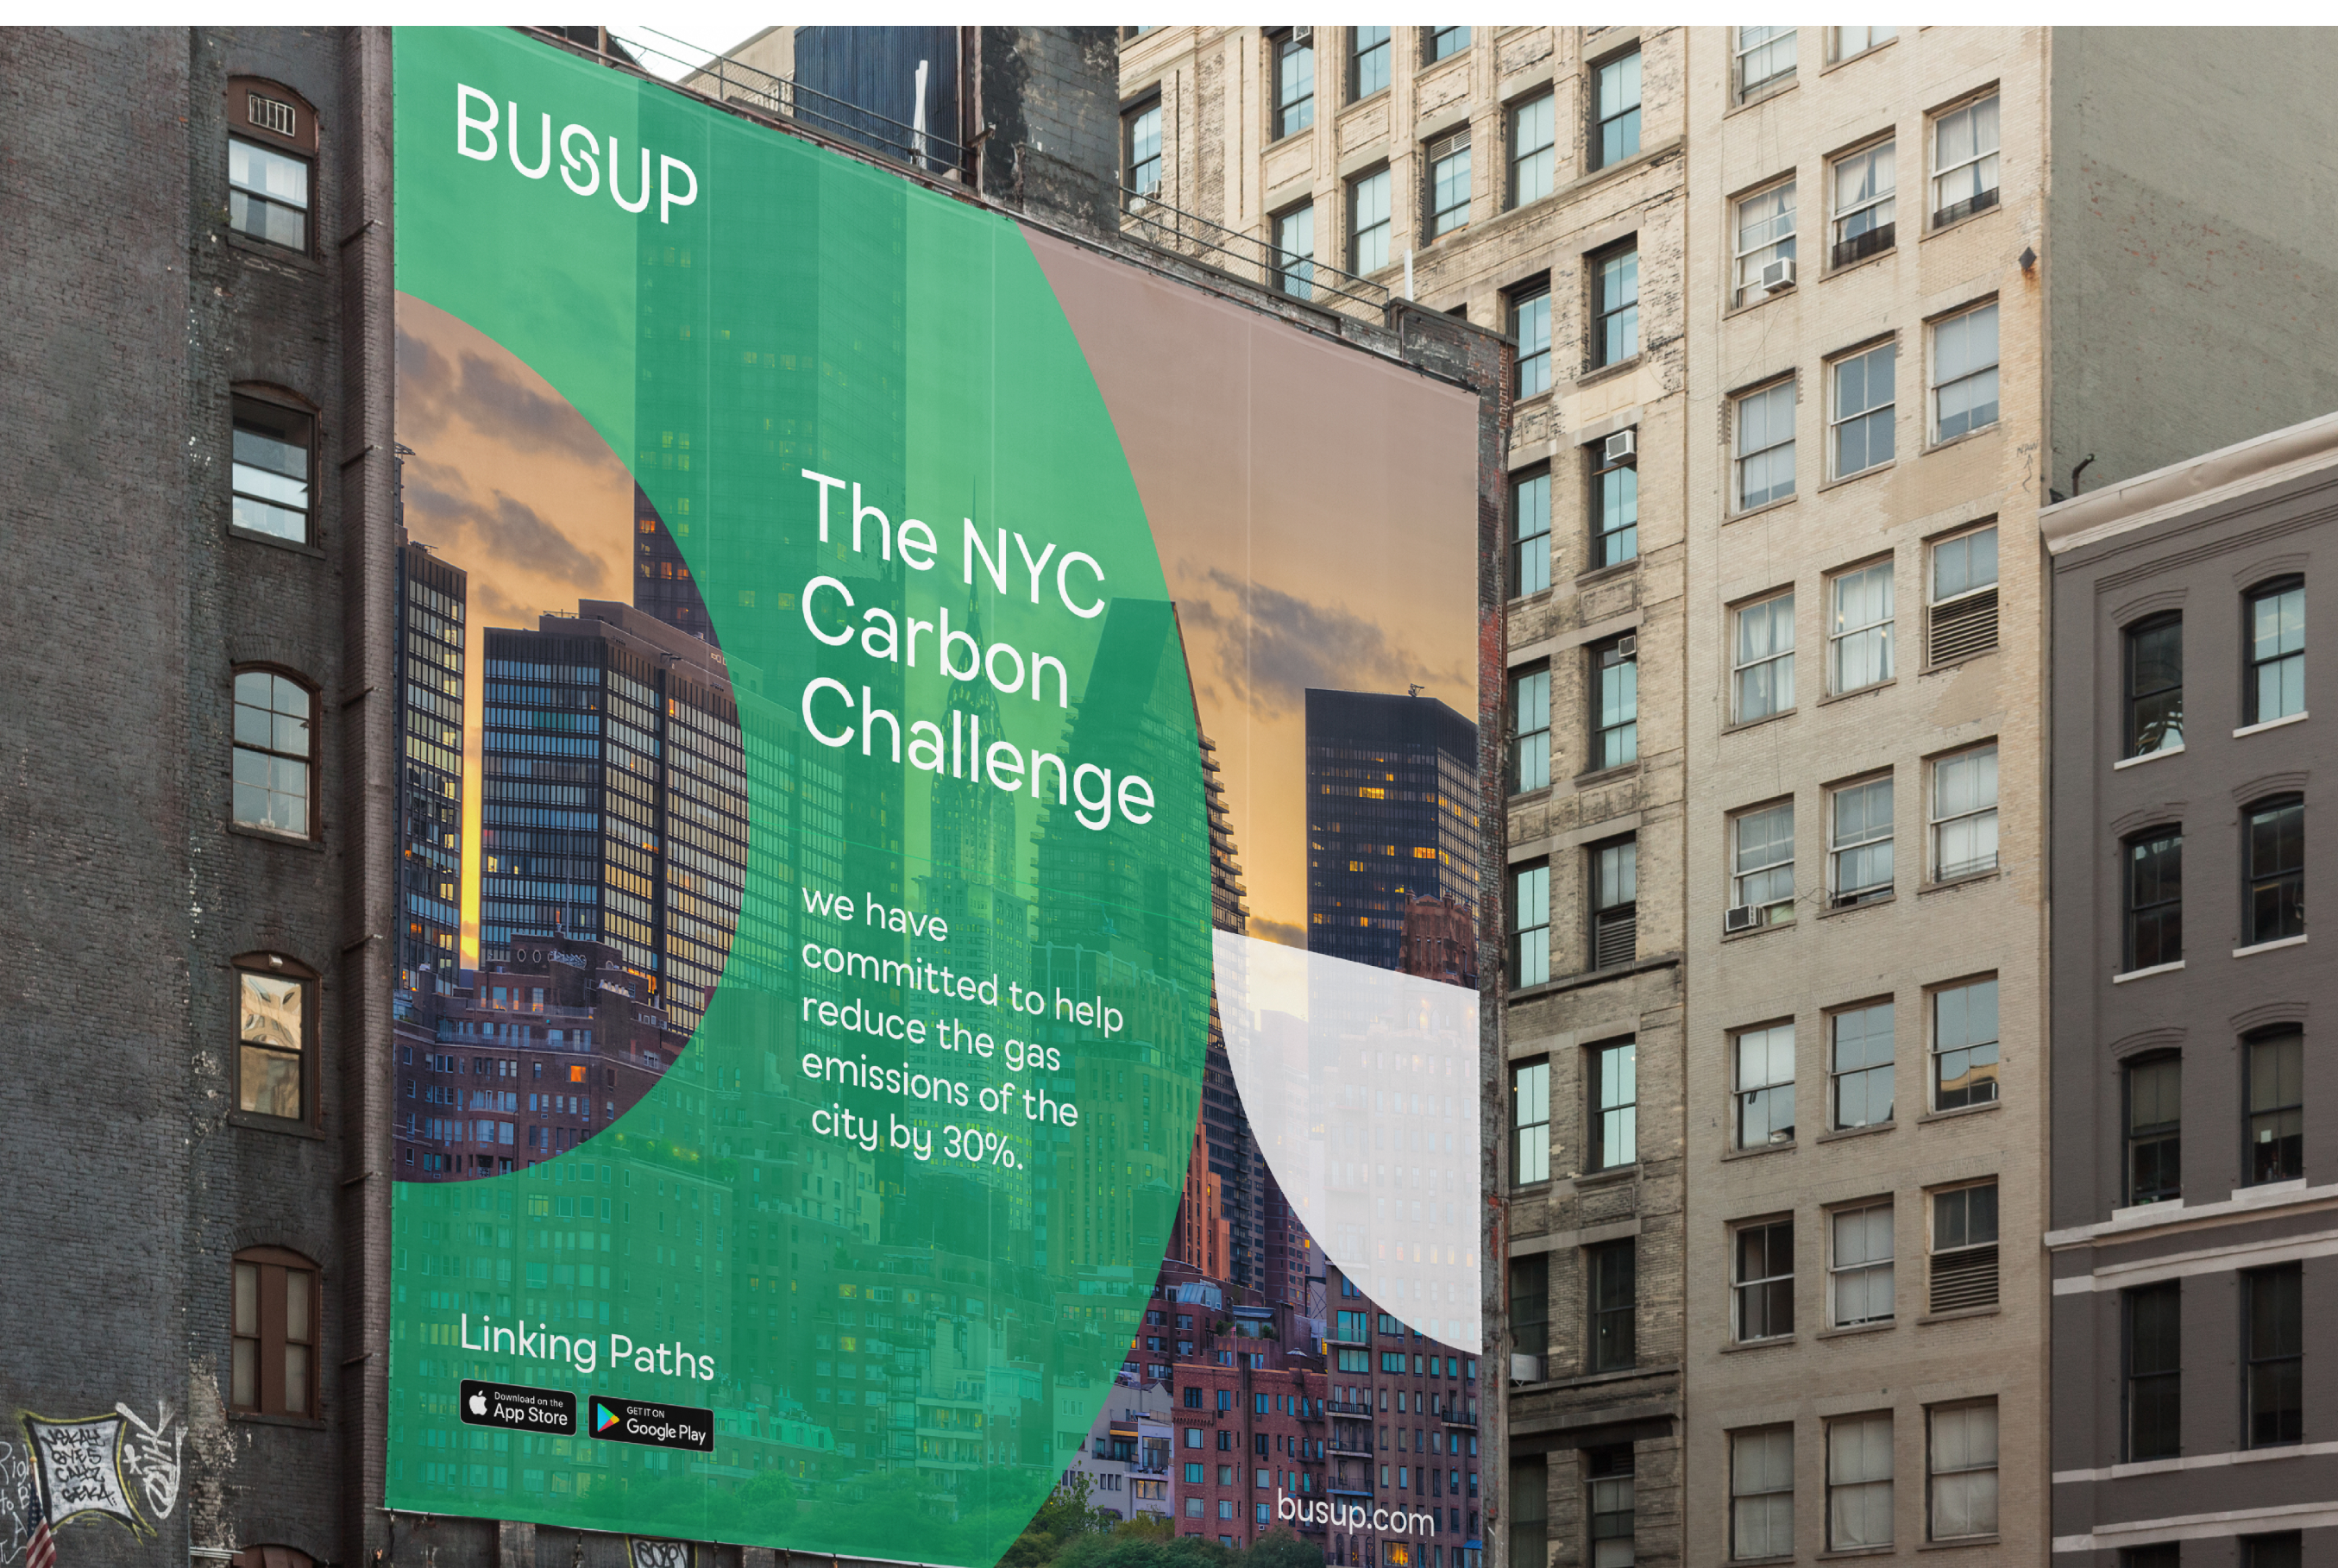 Busup was born to bring shared mobility and needed to update its value proposition in order to compete in corporate mobility to workplaces. We intervened in multiple areas to achieve consistency and differentiation.
